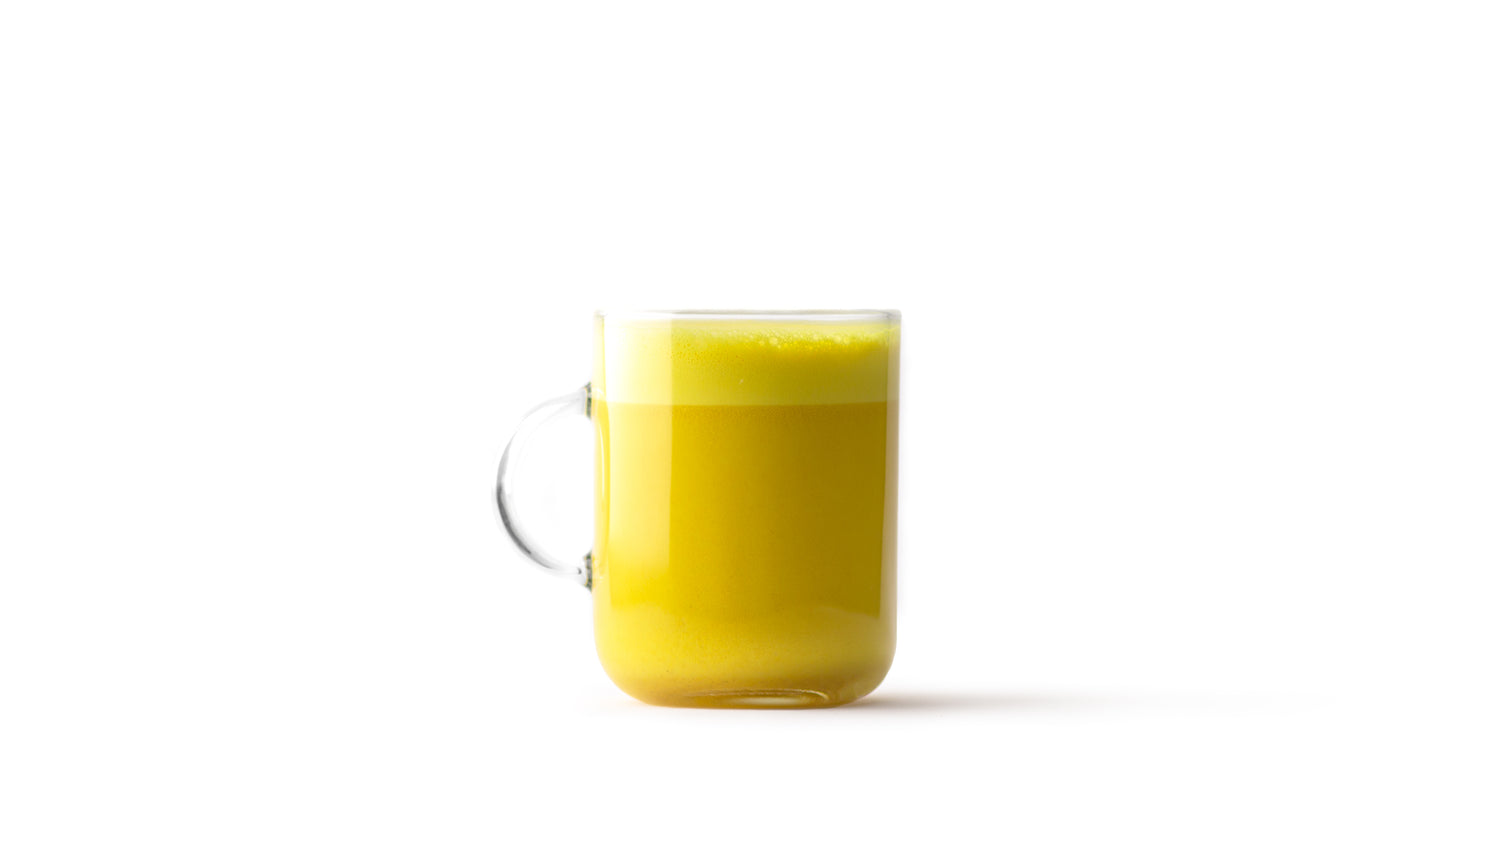 golden milk latte in a clear glass mug with a clear handle